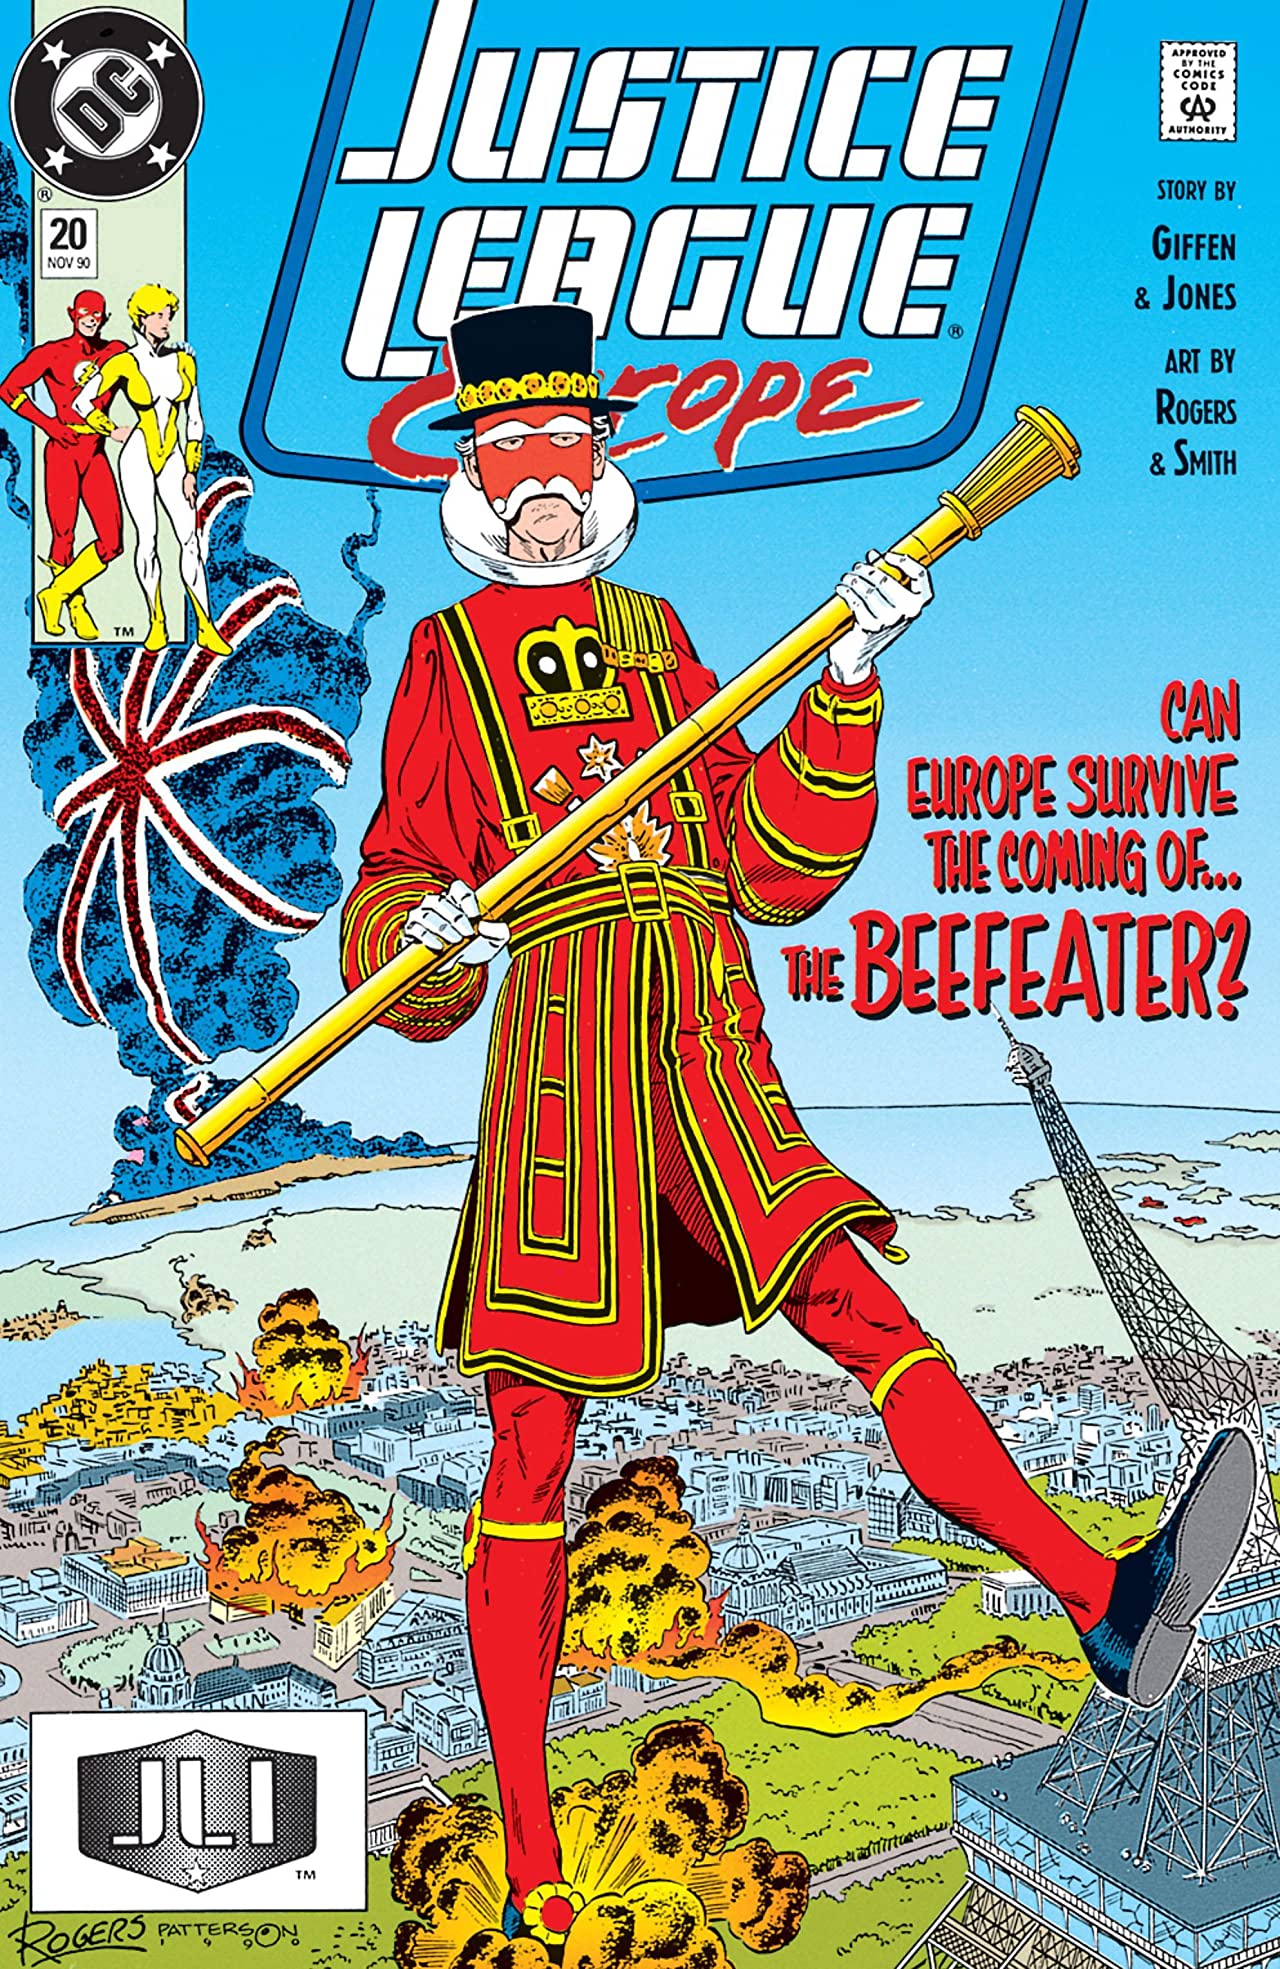 Justice League Europe #20 cover by Marshall Rogers and Bruce Patterson